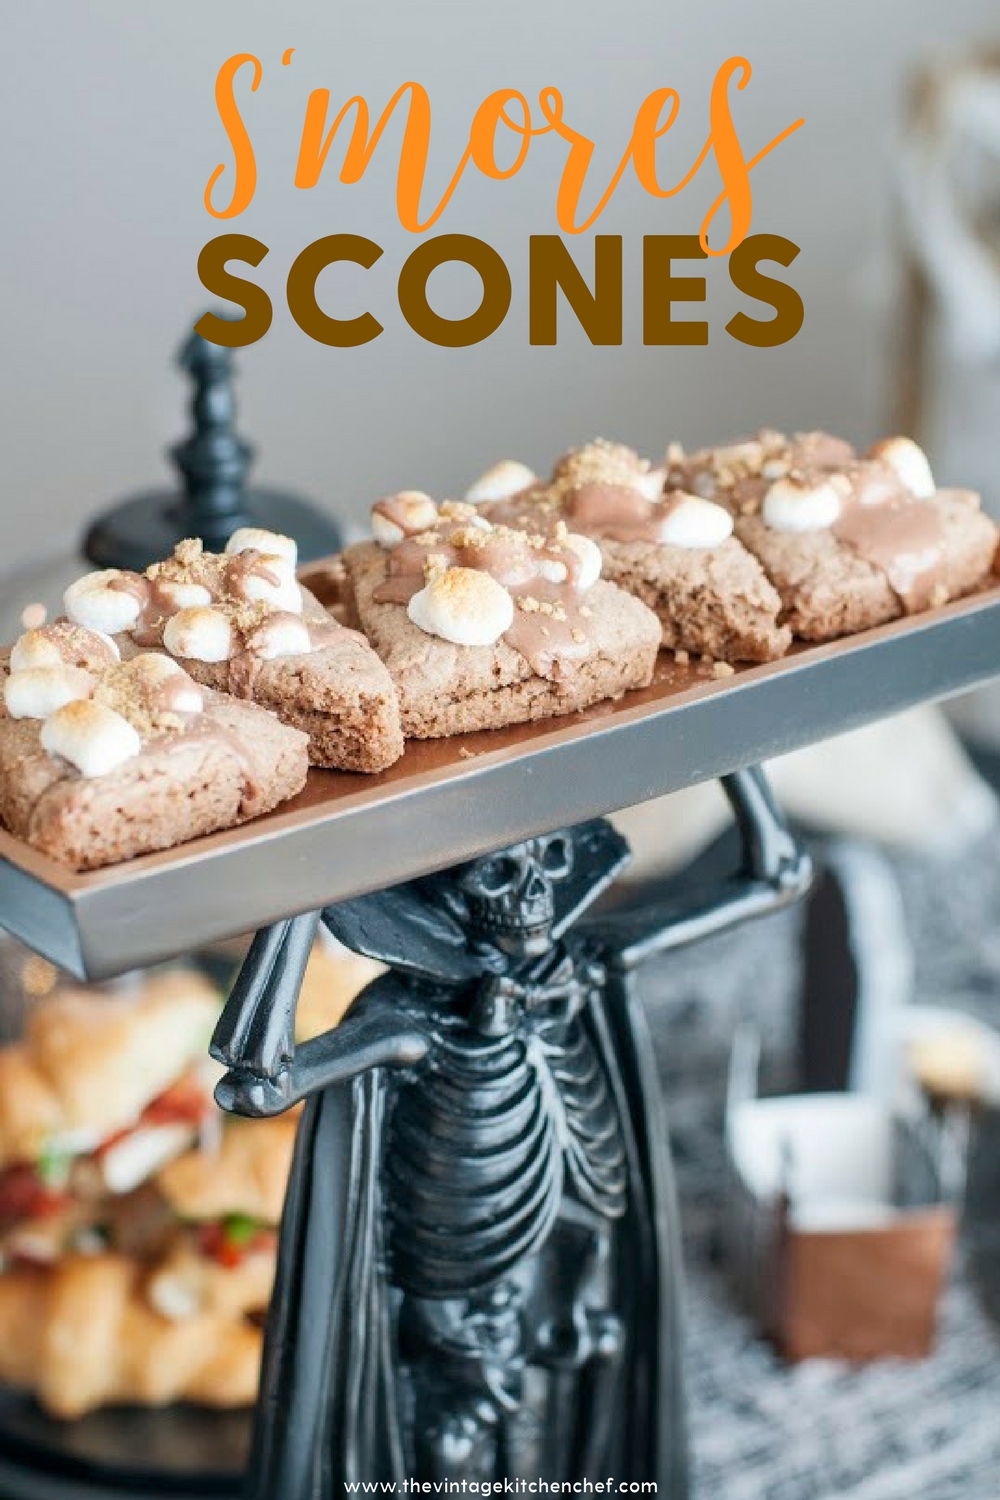 These are to die for and incredibly delicious with the yummy flavors of s'mores baked into light, fluffy scones! One just may not be enough!